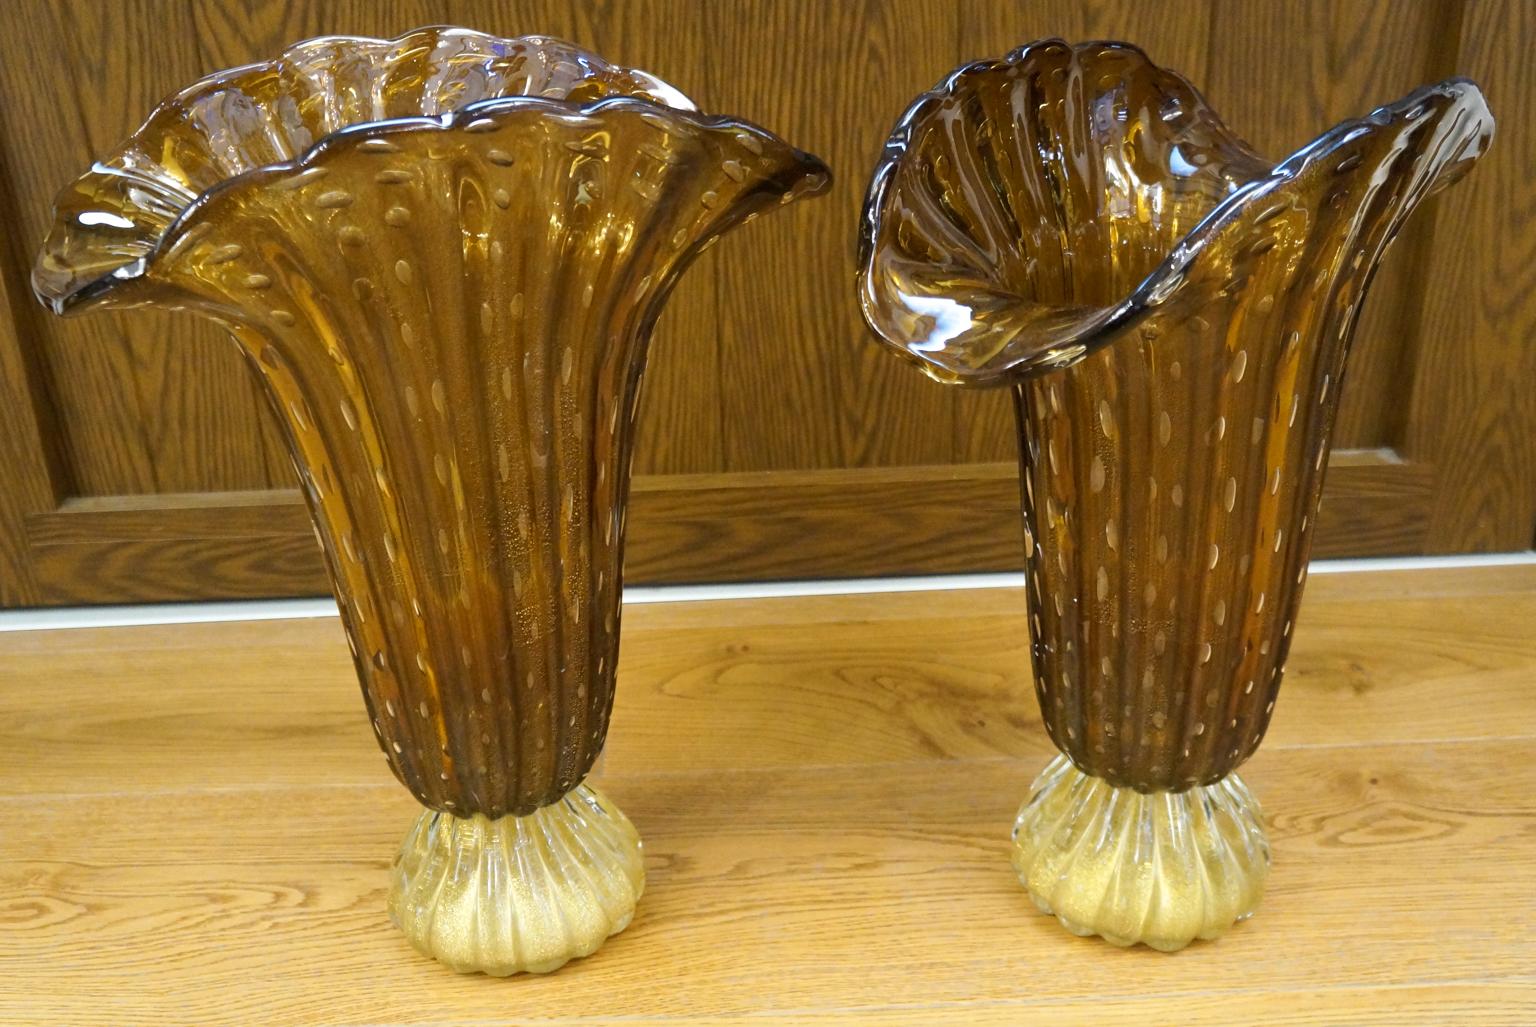 Toso Mid-Century Modern Tobacco Gold Pair of Murano Glass Vases Signed, 1987 For Sale 2